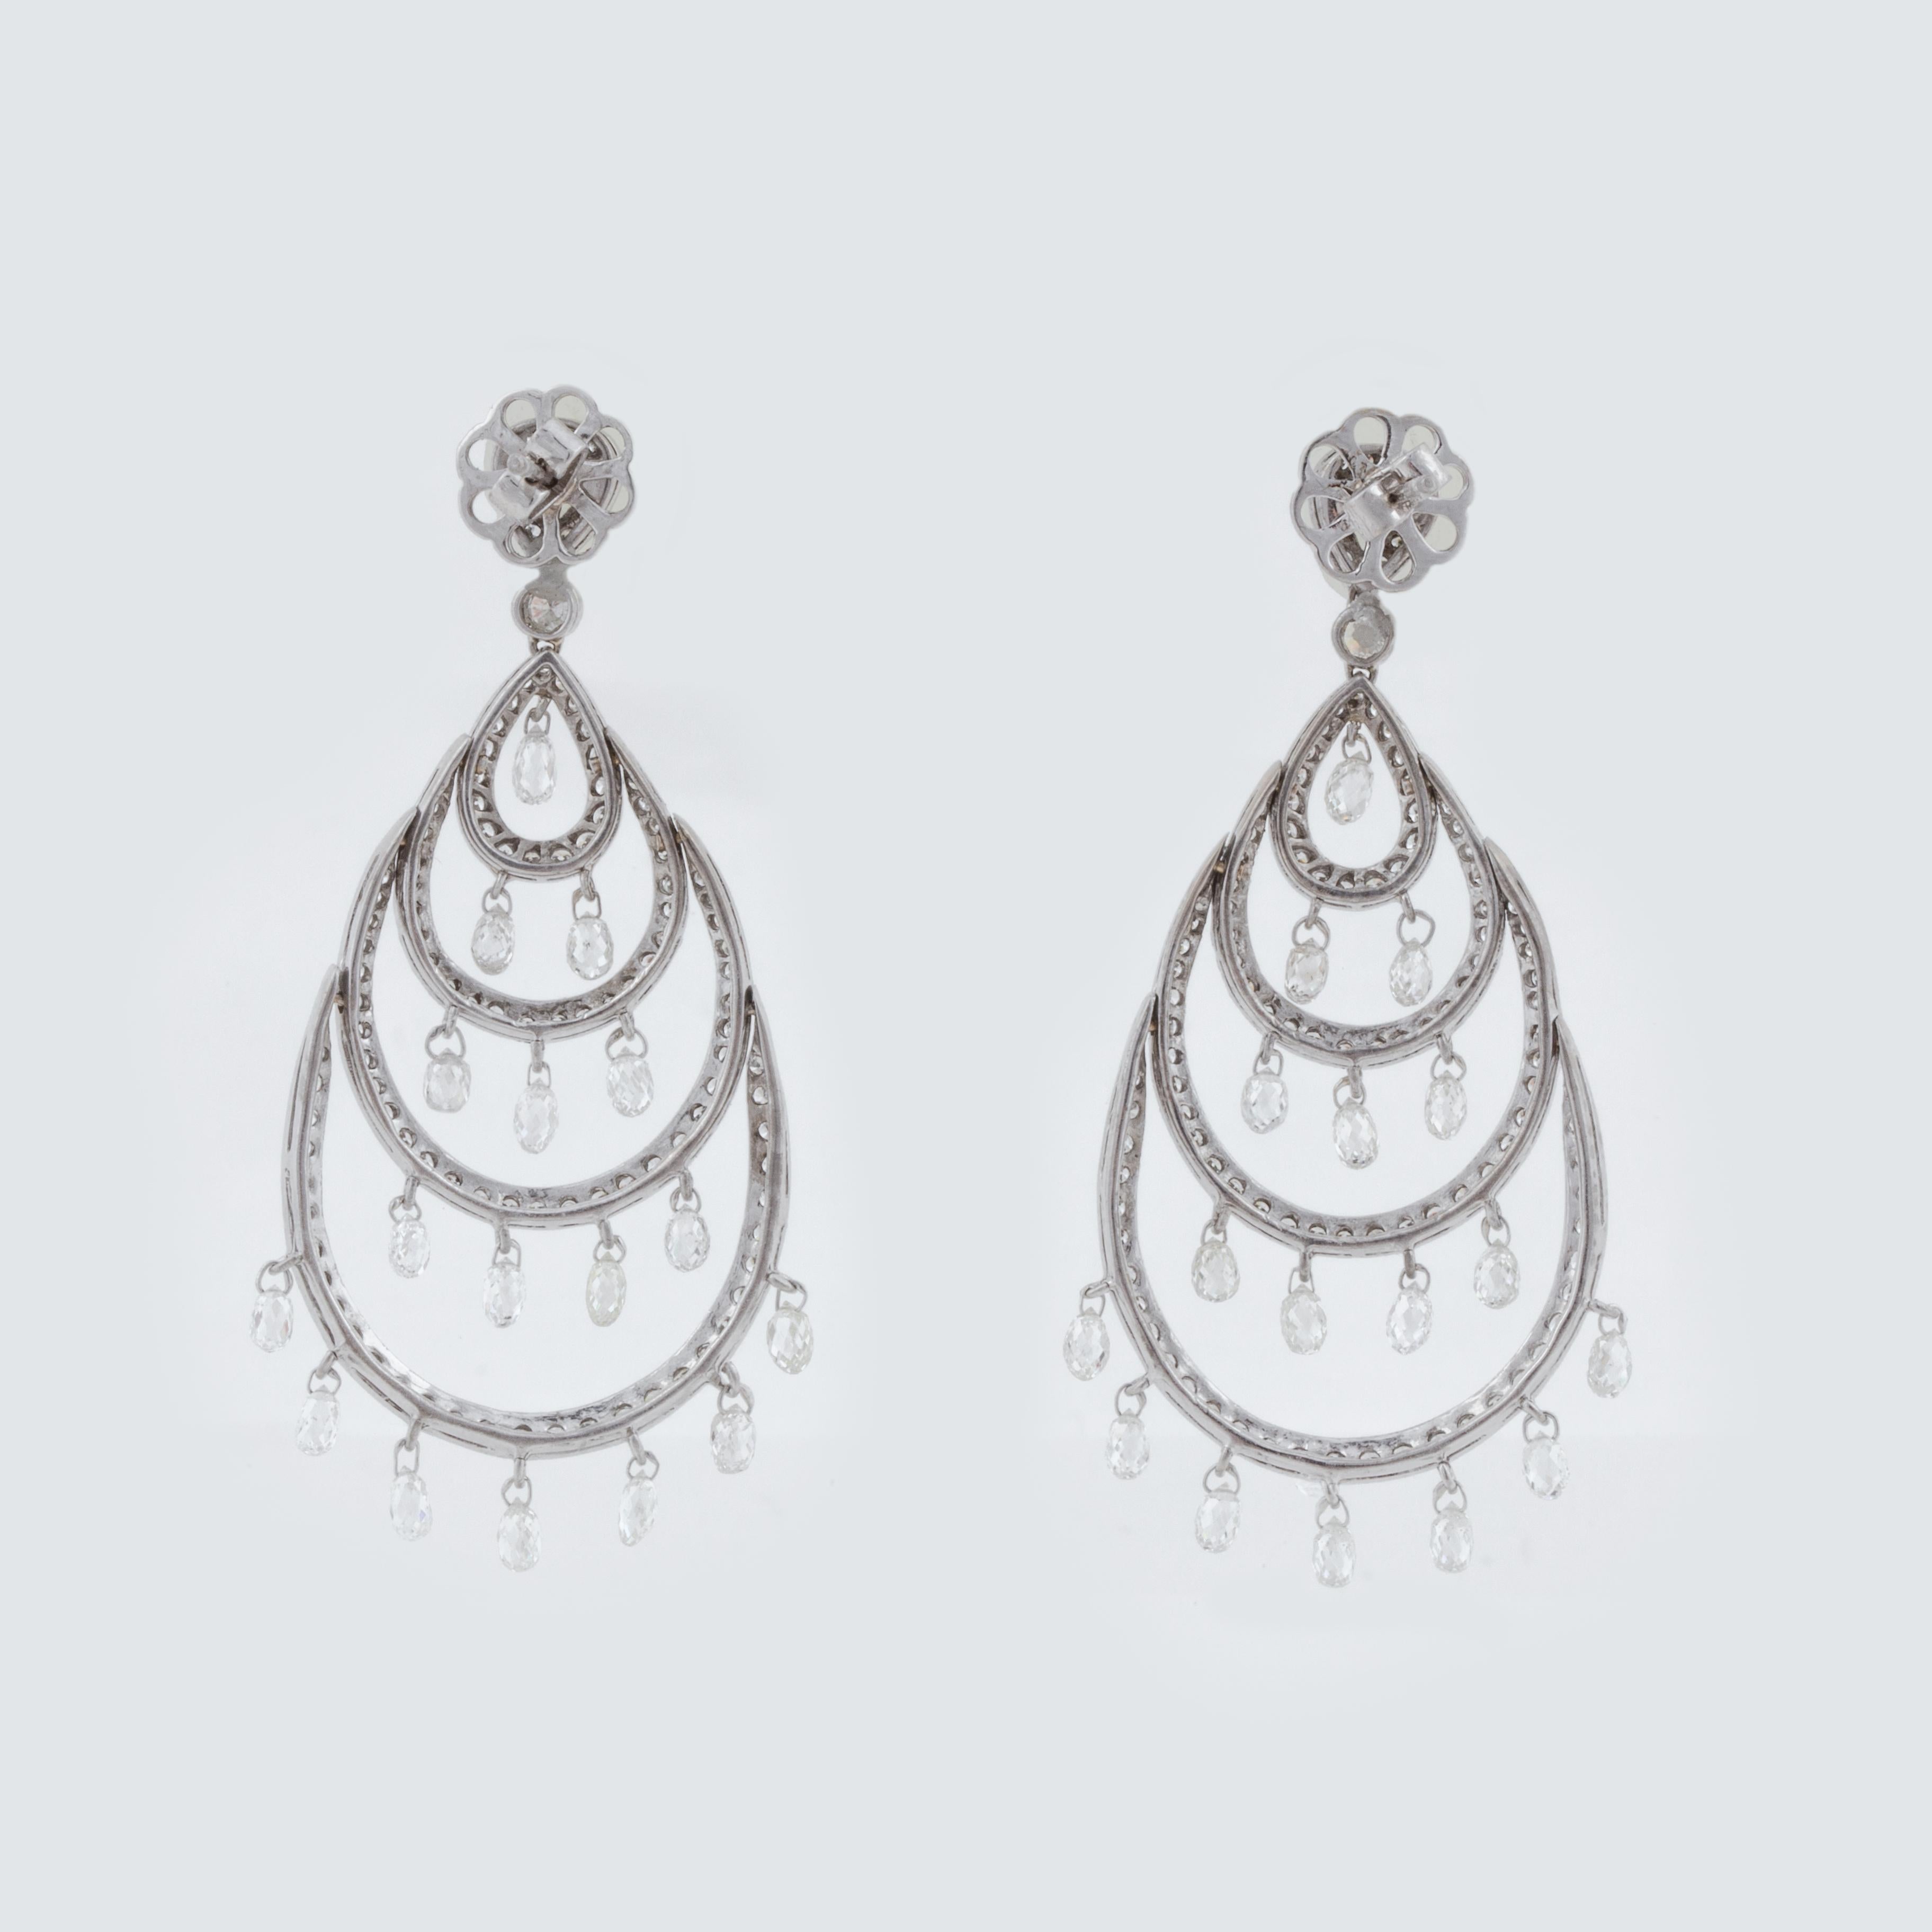 18K white gold chandelier earrings with round, rose-cut, and briolette diamonds. There are 24 briolette diamonds, 2 rose-cut diamonds and 236 round diamonds that total 11 carats; G-I color and VS2-SI2 clarity.  They are for pierced ears with a post